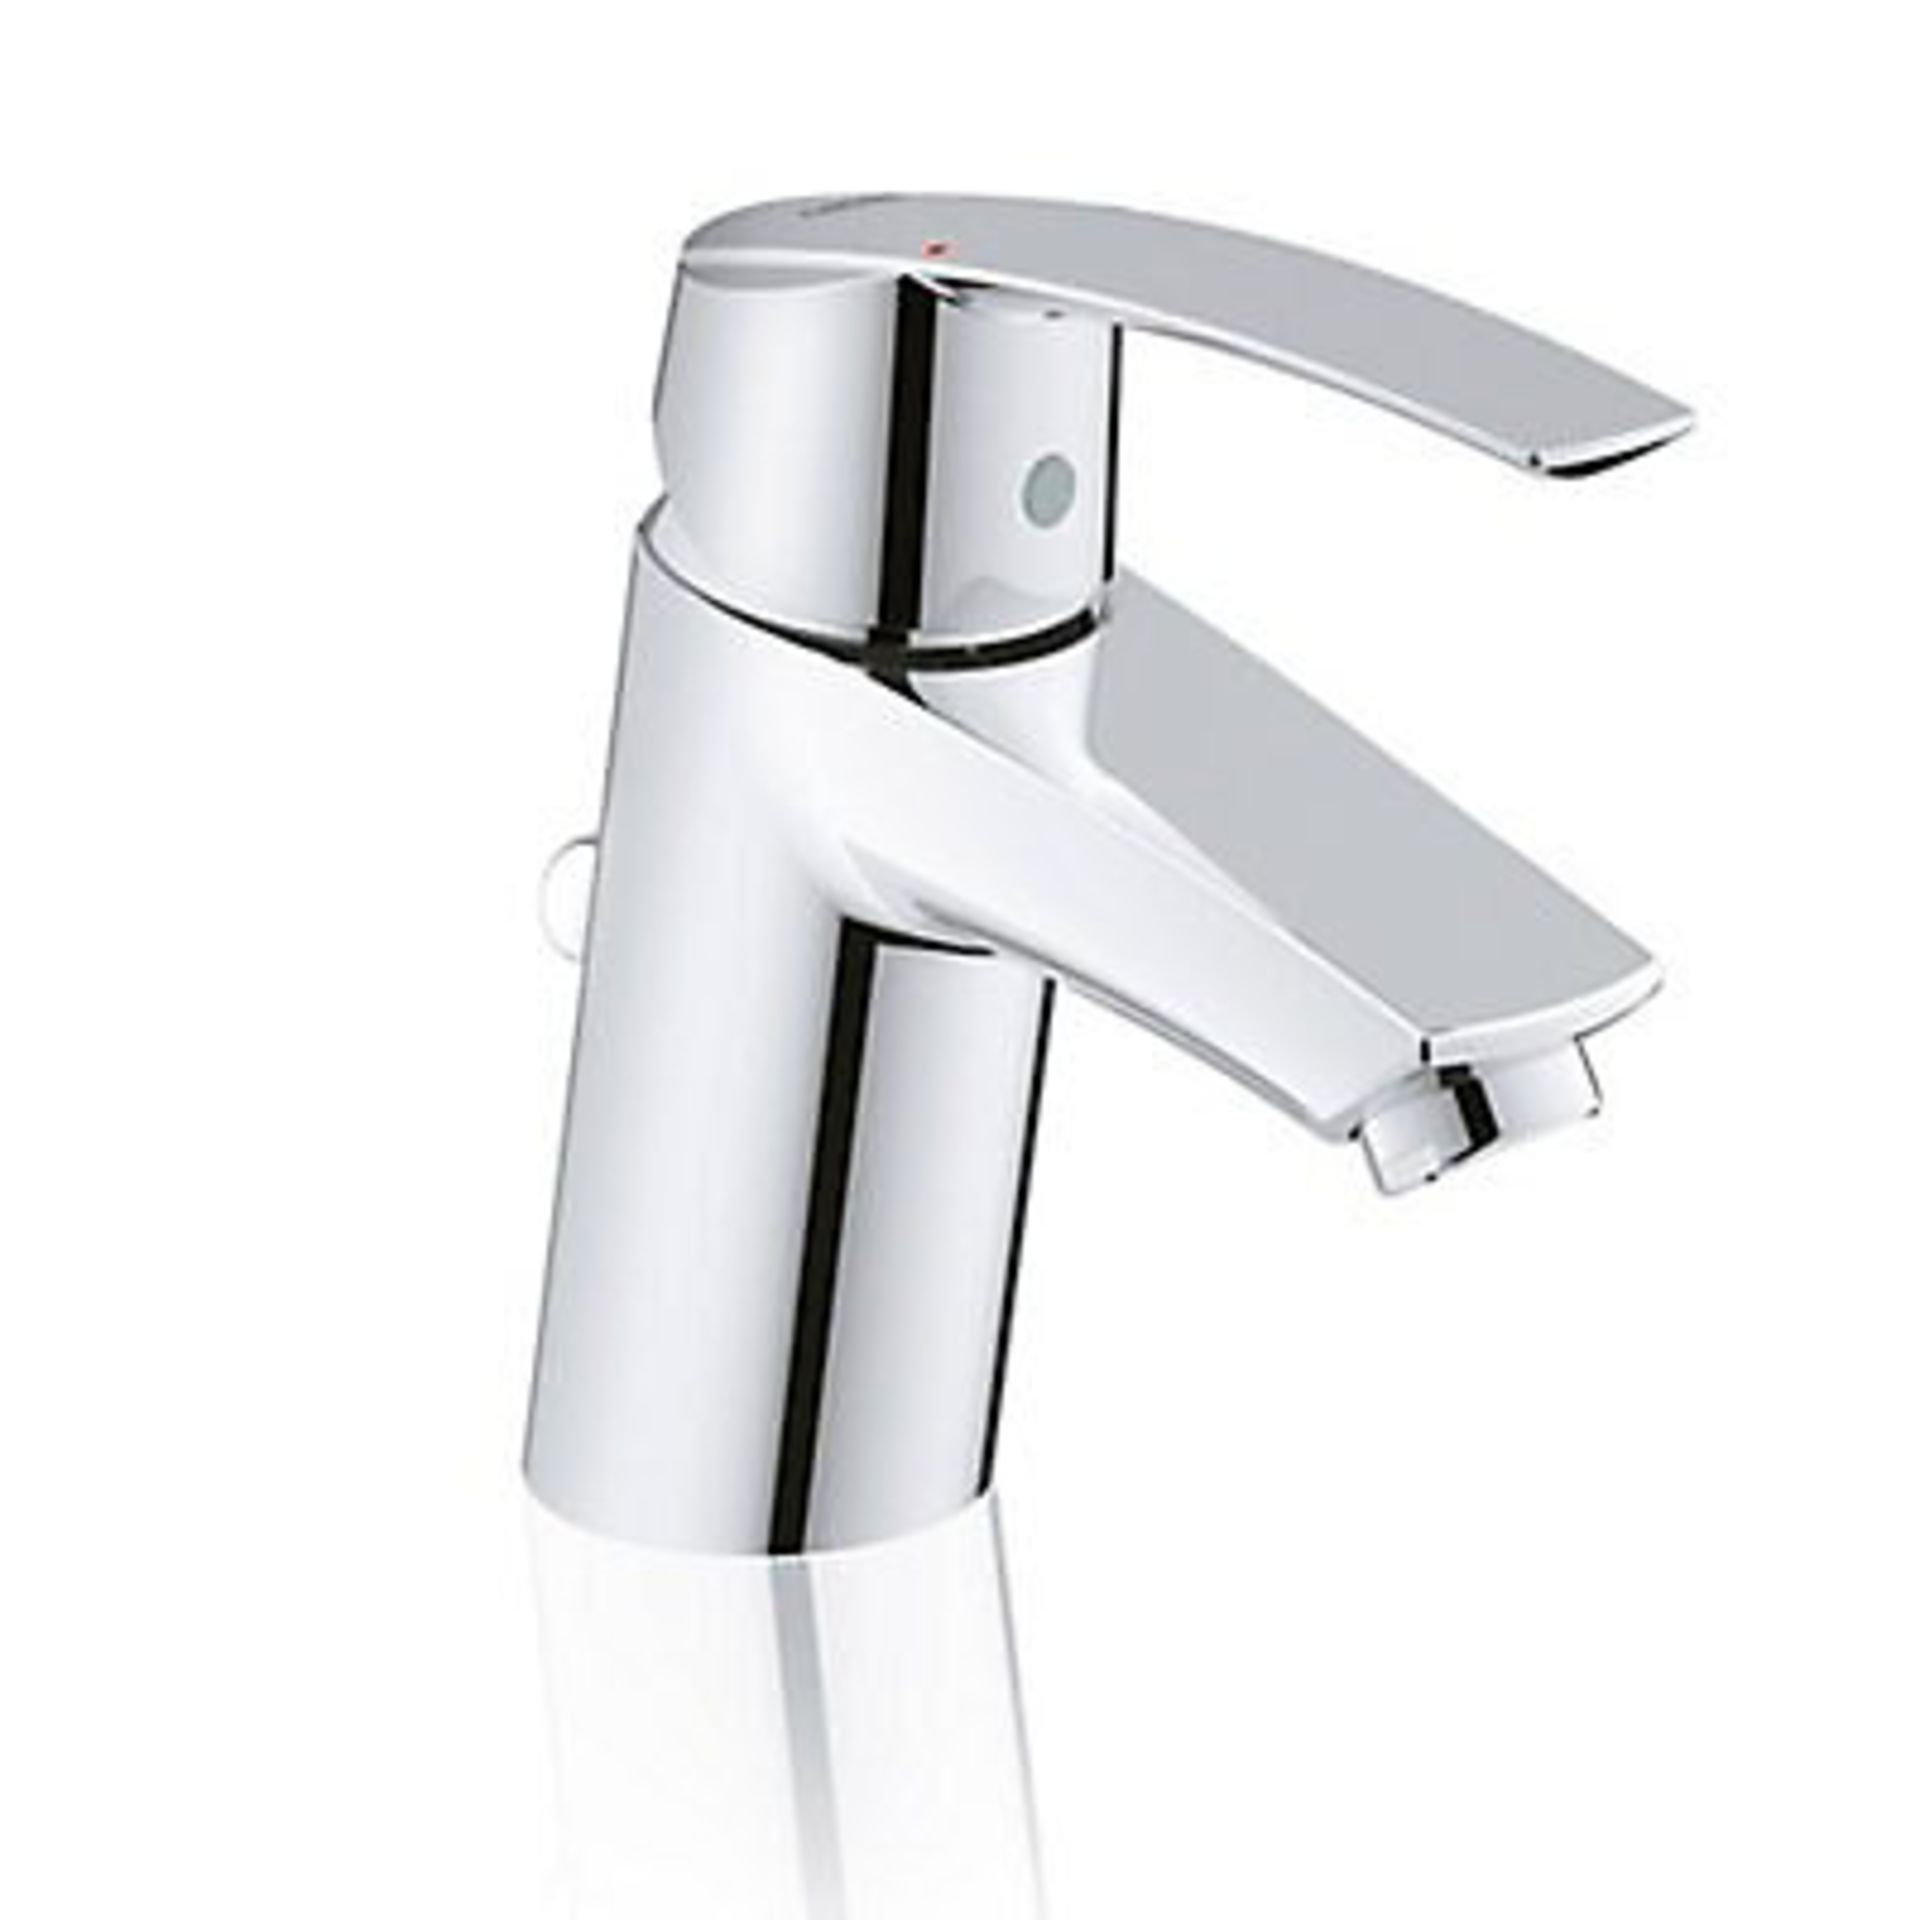 New Grohe Start 1 Lever Chrome Effect Modern Basin Mono Mixer Tap . This Modern Styled Chrome ... - Image 2 of 3